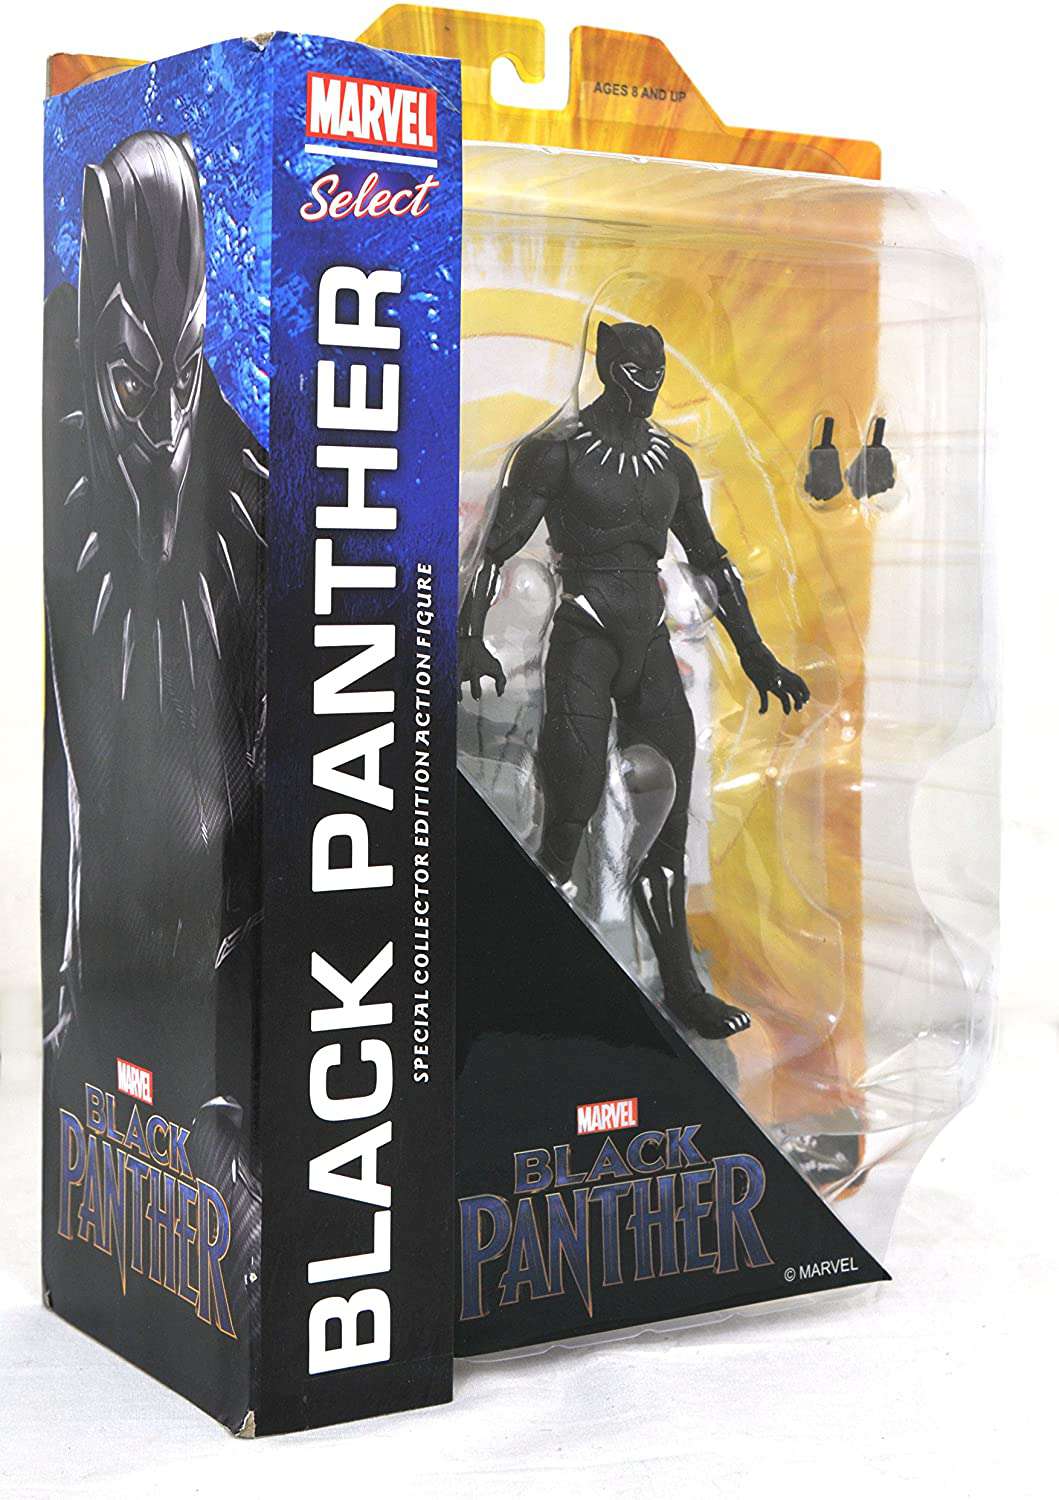 Diamond Select Toys Marvel Select Black Panther 2018 Movie Action